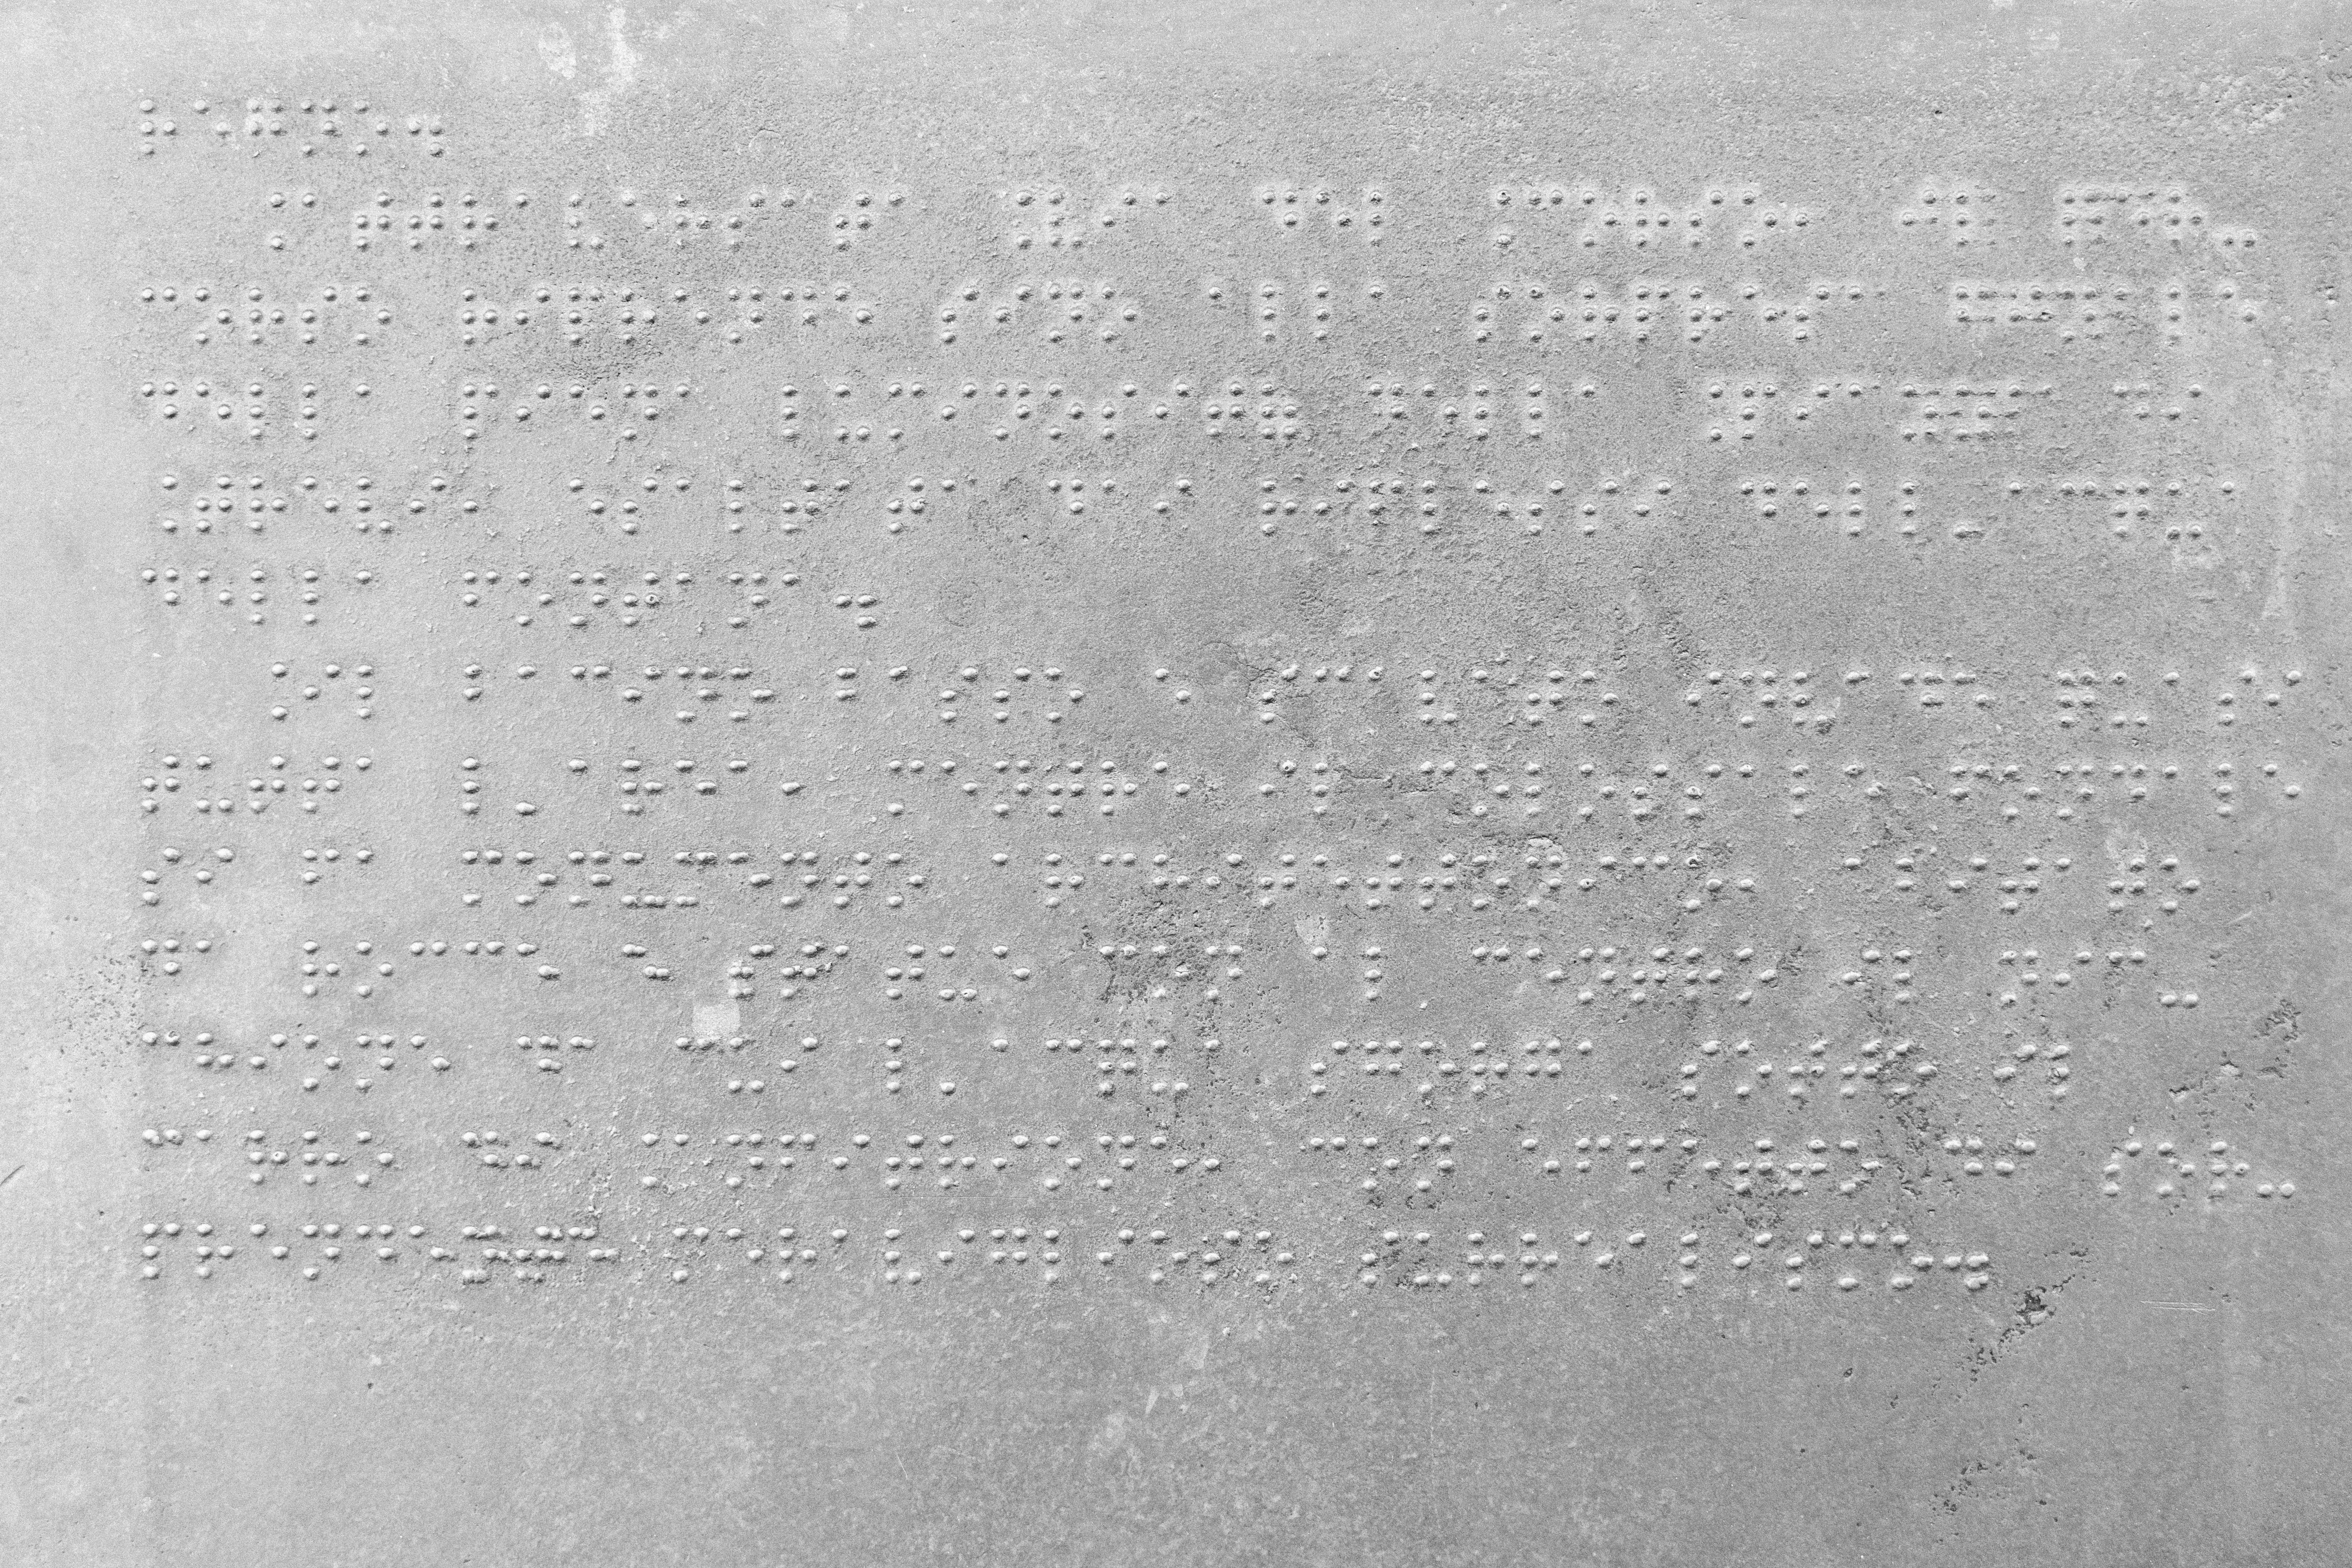 filler picture of braille